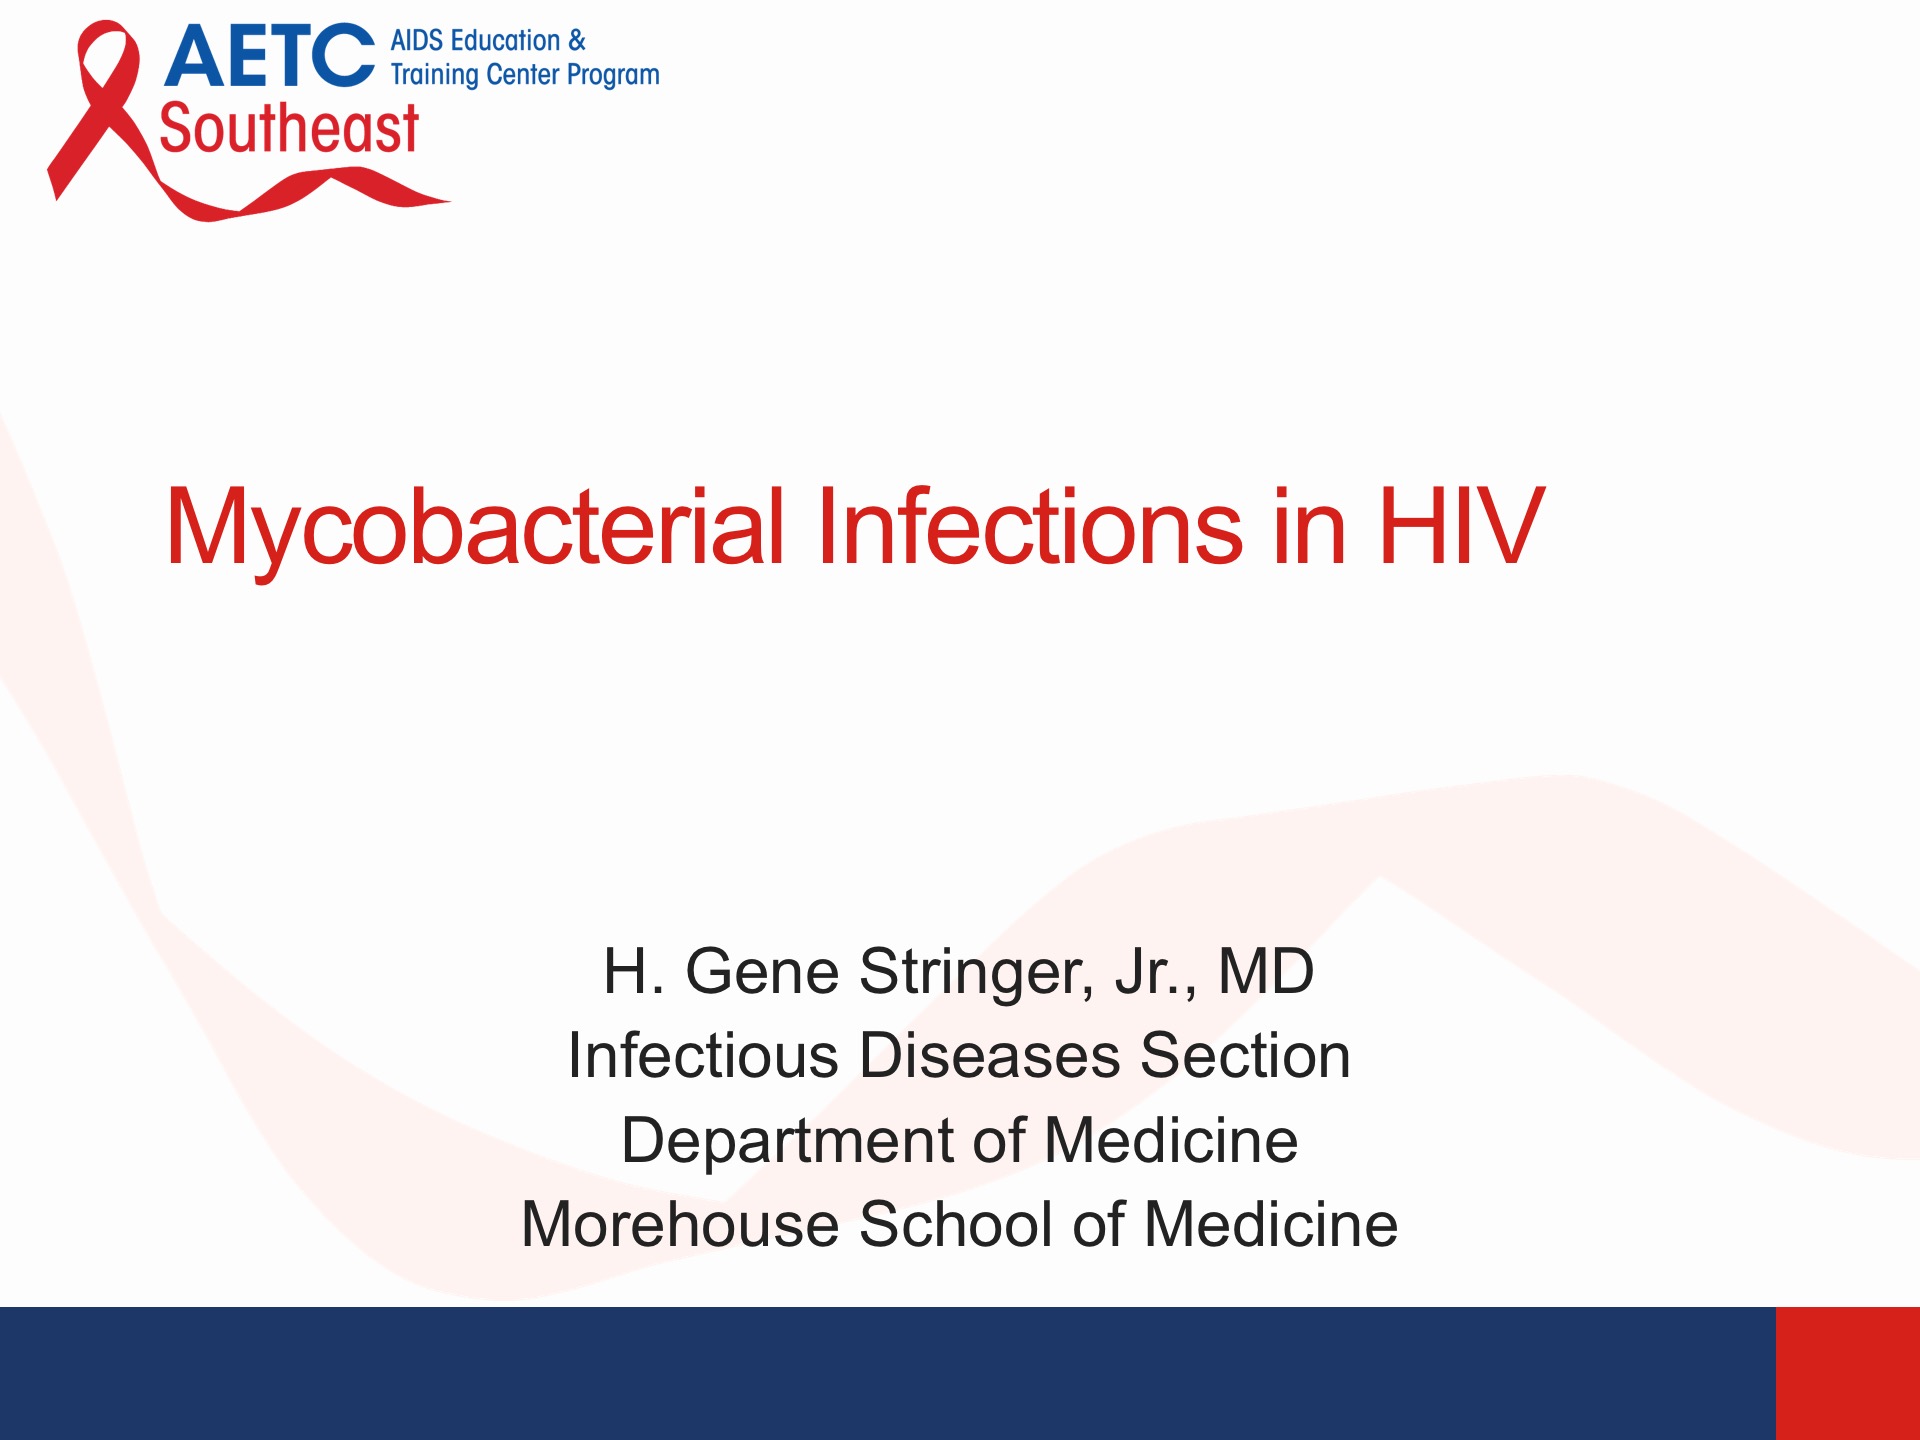 Mycobacterial Infections in HIV